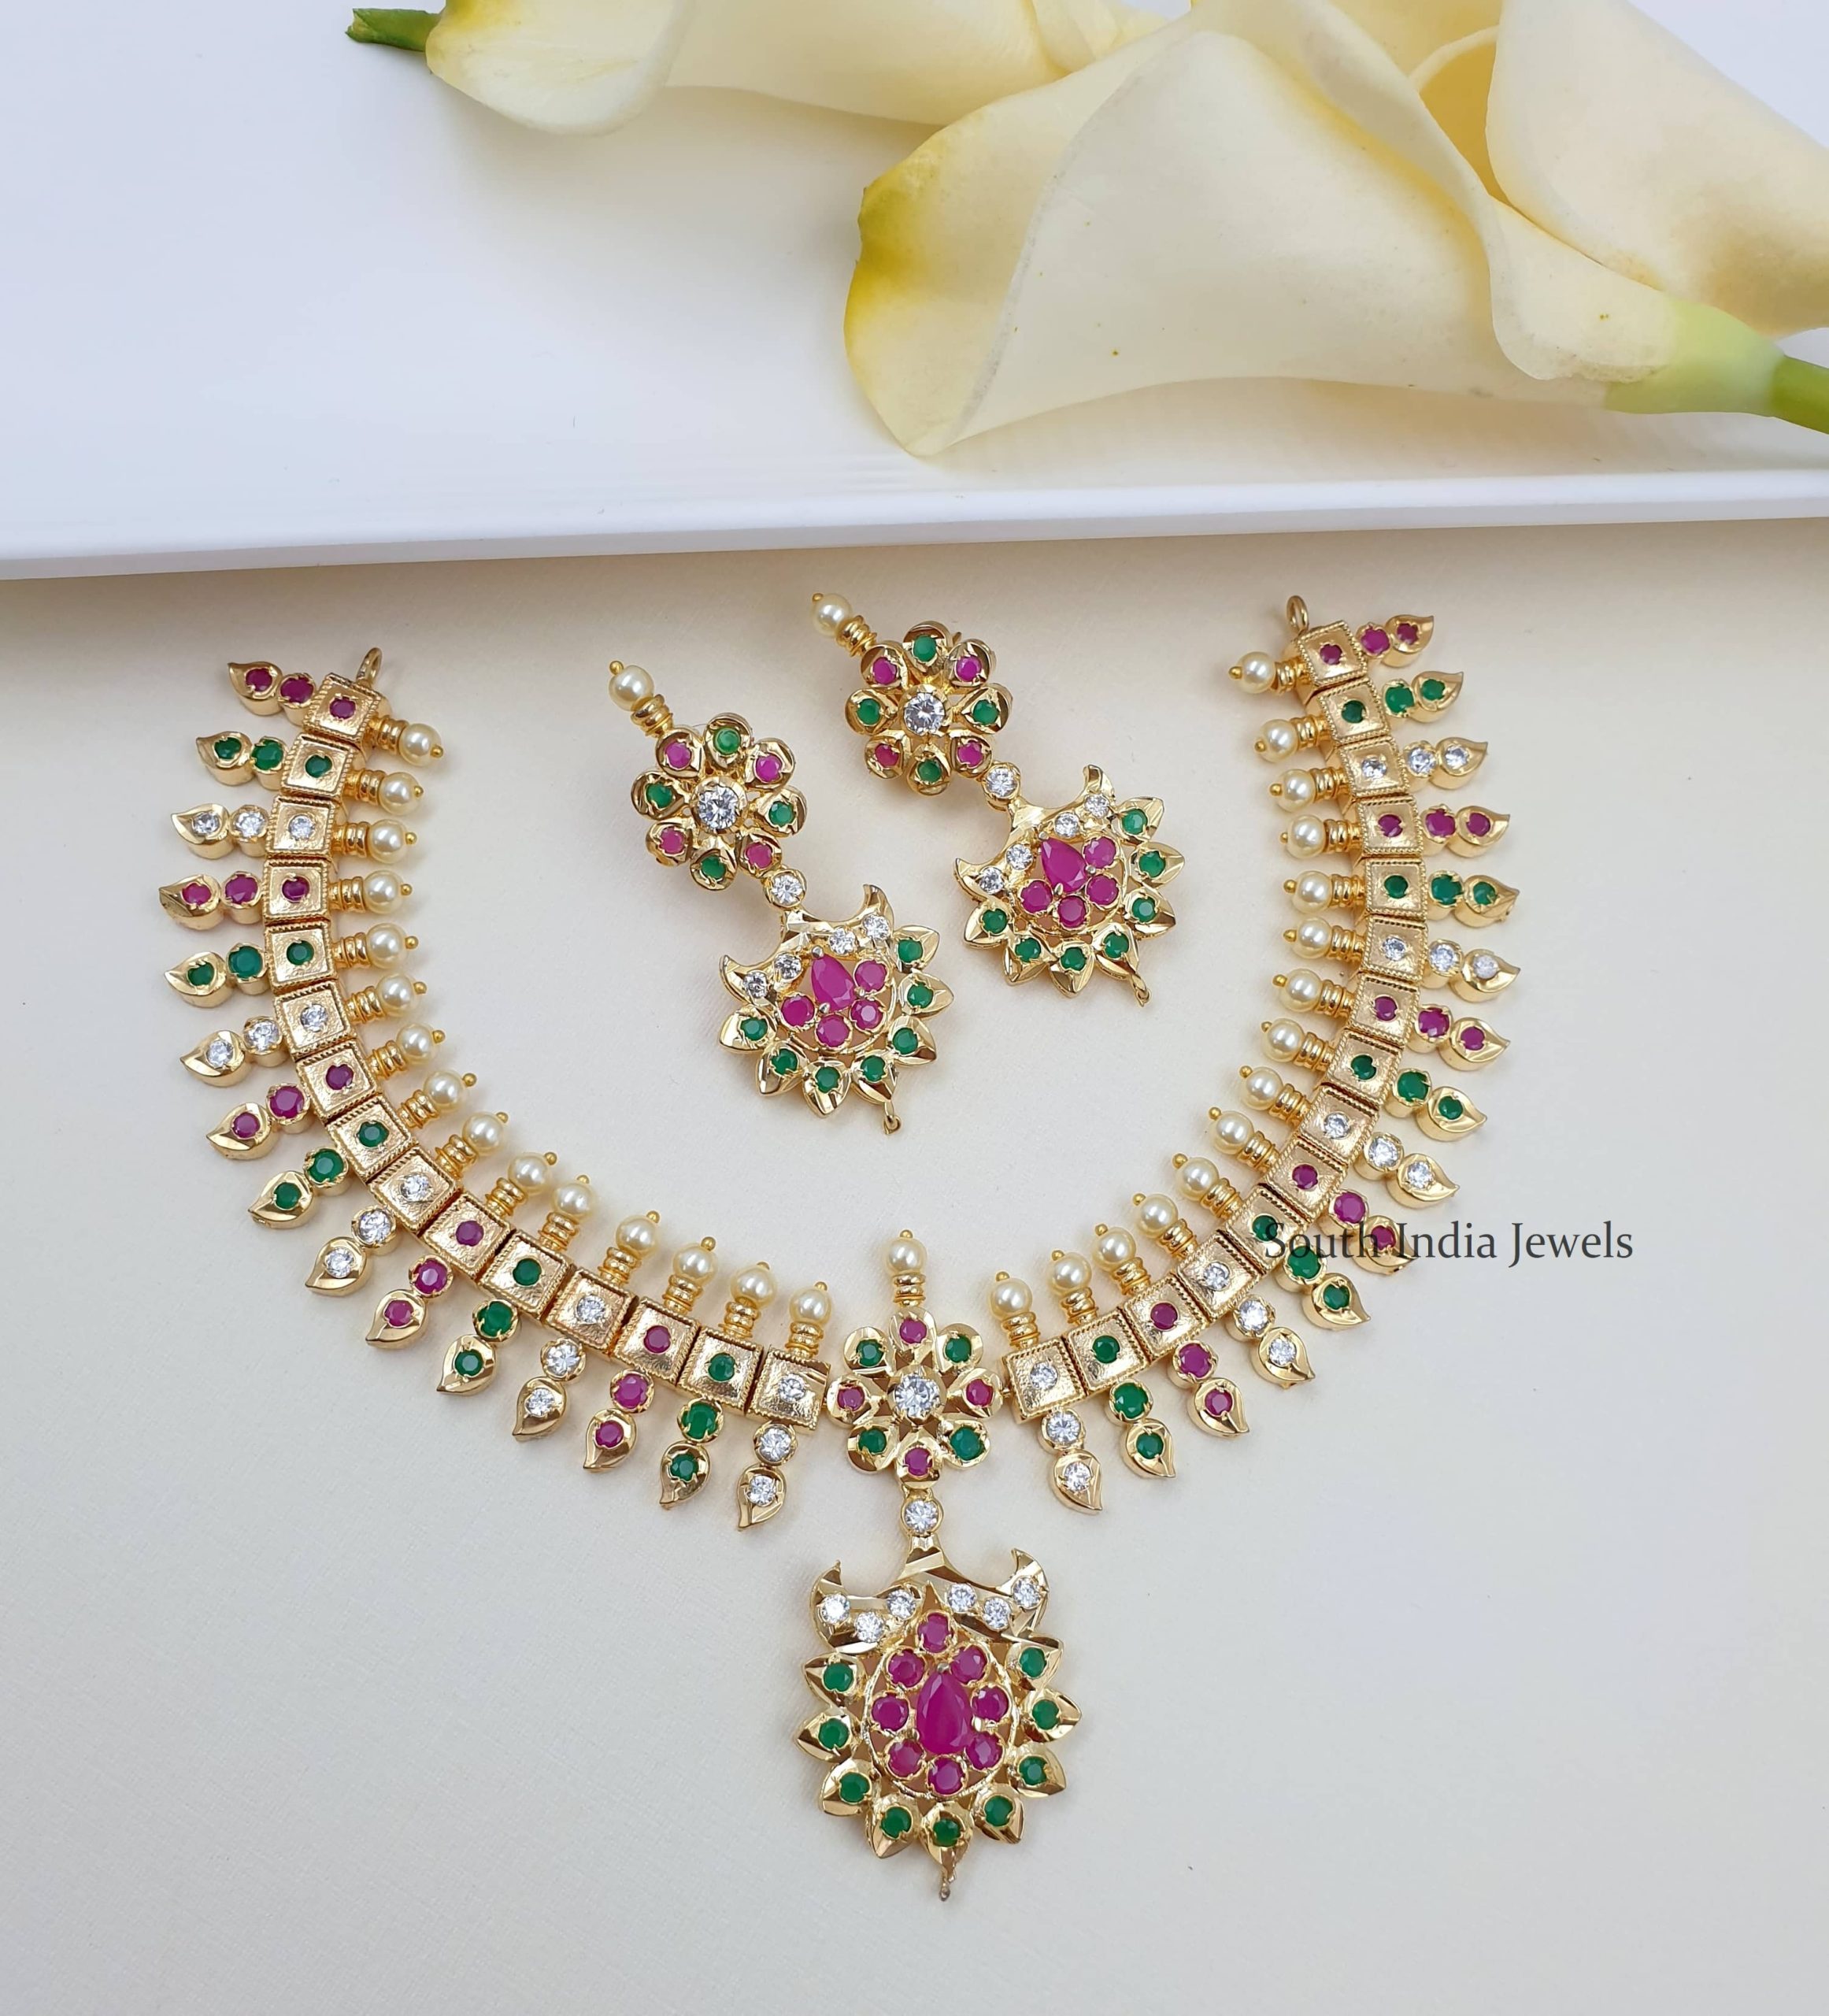 Beautiful Necklace with Dangler Earrings